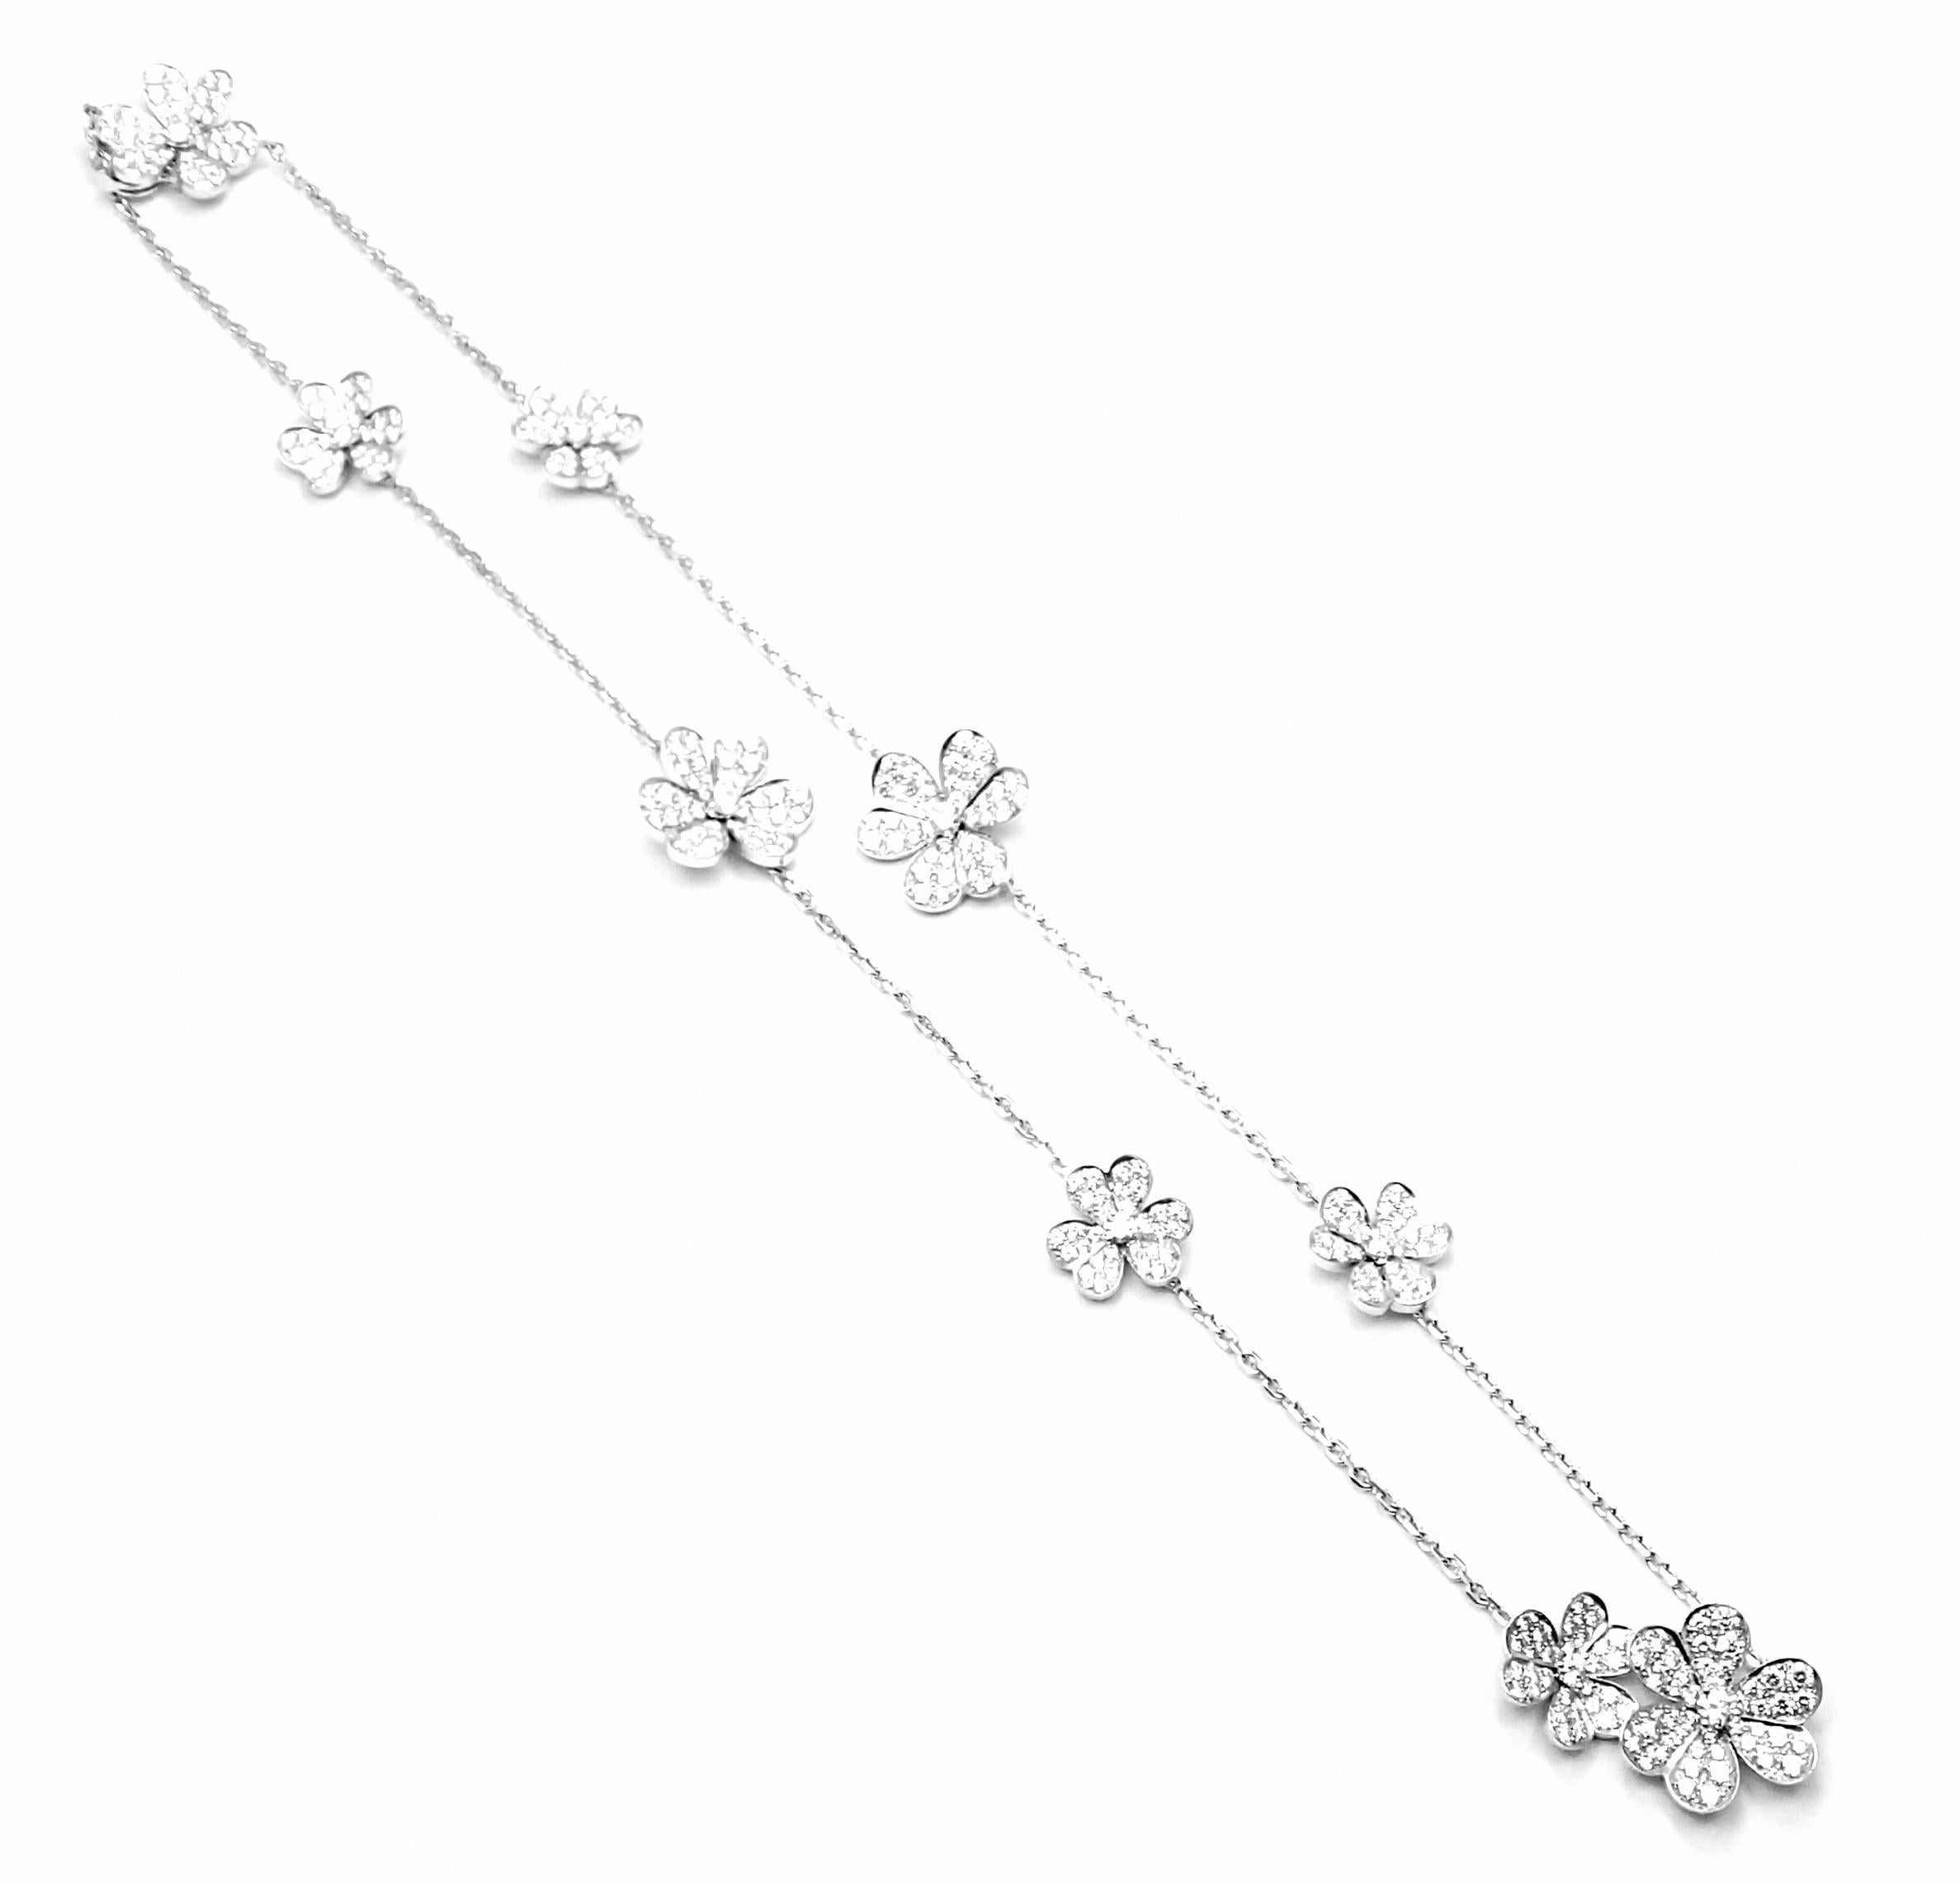 18k White Gold Diamond Frivole 9 Flower Necklace by Van Cleef & Arpels
With 327 brilliant round cut diamond VVS1 clarity, E color
total weight approximately 5.12ct
This necklace comes with service paper from VCA store in NYC.
Details: 
Length: